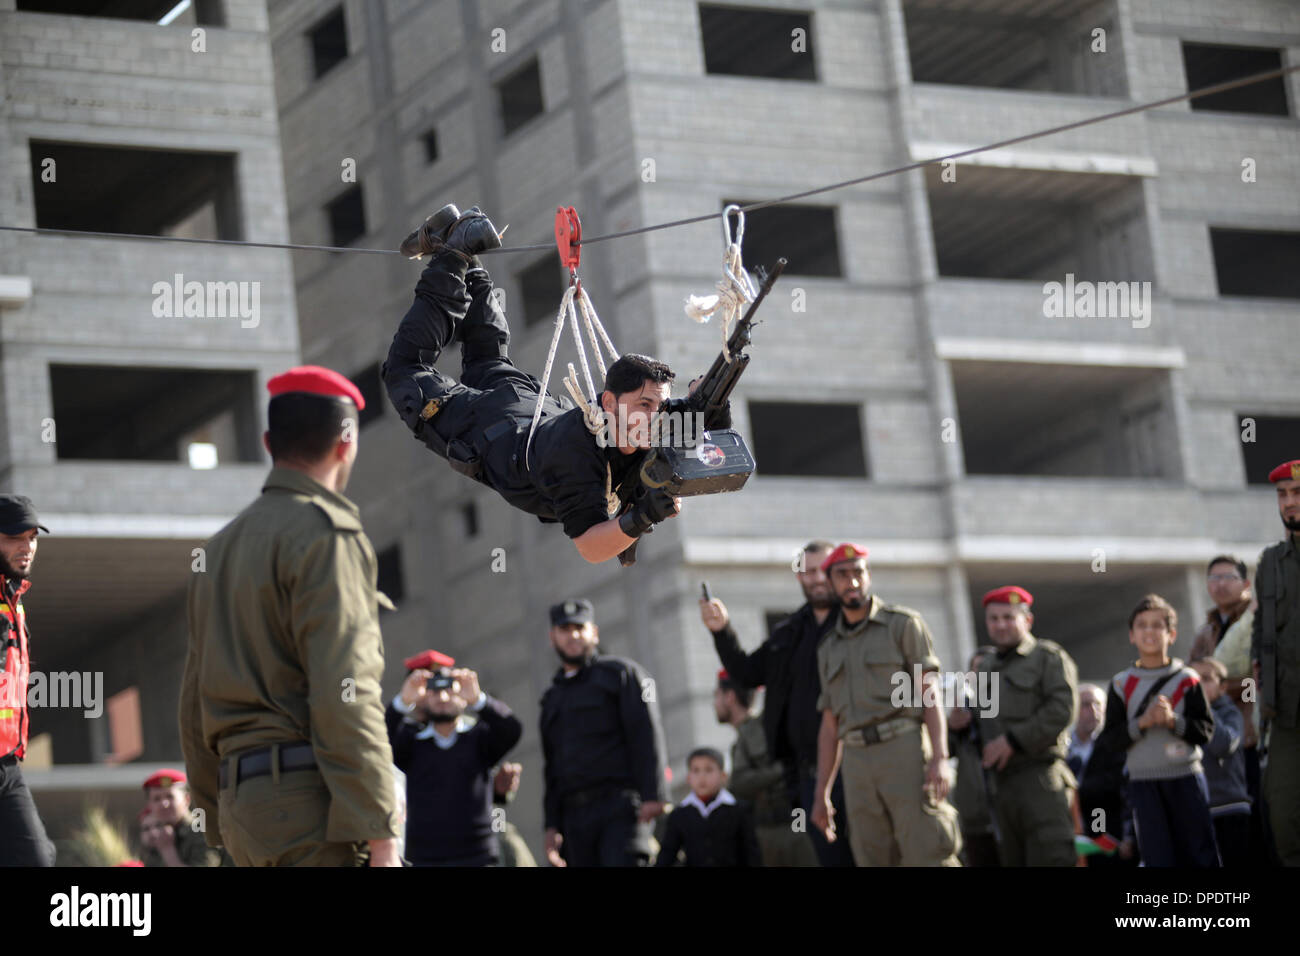 Gaza, Palestinian Territories. 13th Jan, 2014. A Member of Palestinian security forces loyal to Hamas Government in Gaza shows his military skills during a parade marking the fifth anniversary of the three-week offensive Israel launched in 2008-2009, in Gaza City January 13, 2014. Credit:  Ahmed Deeb/NurPhoto/ZUMAPRESS.com/Alamy Live News Stock Photo